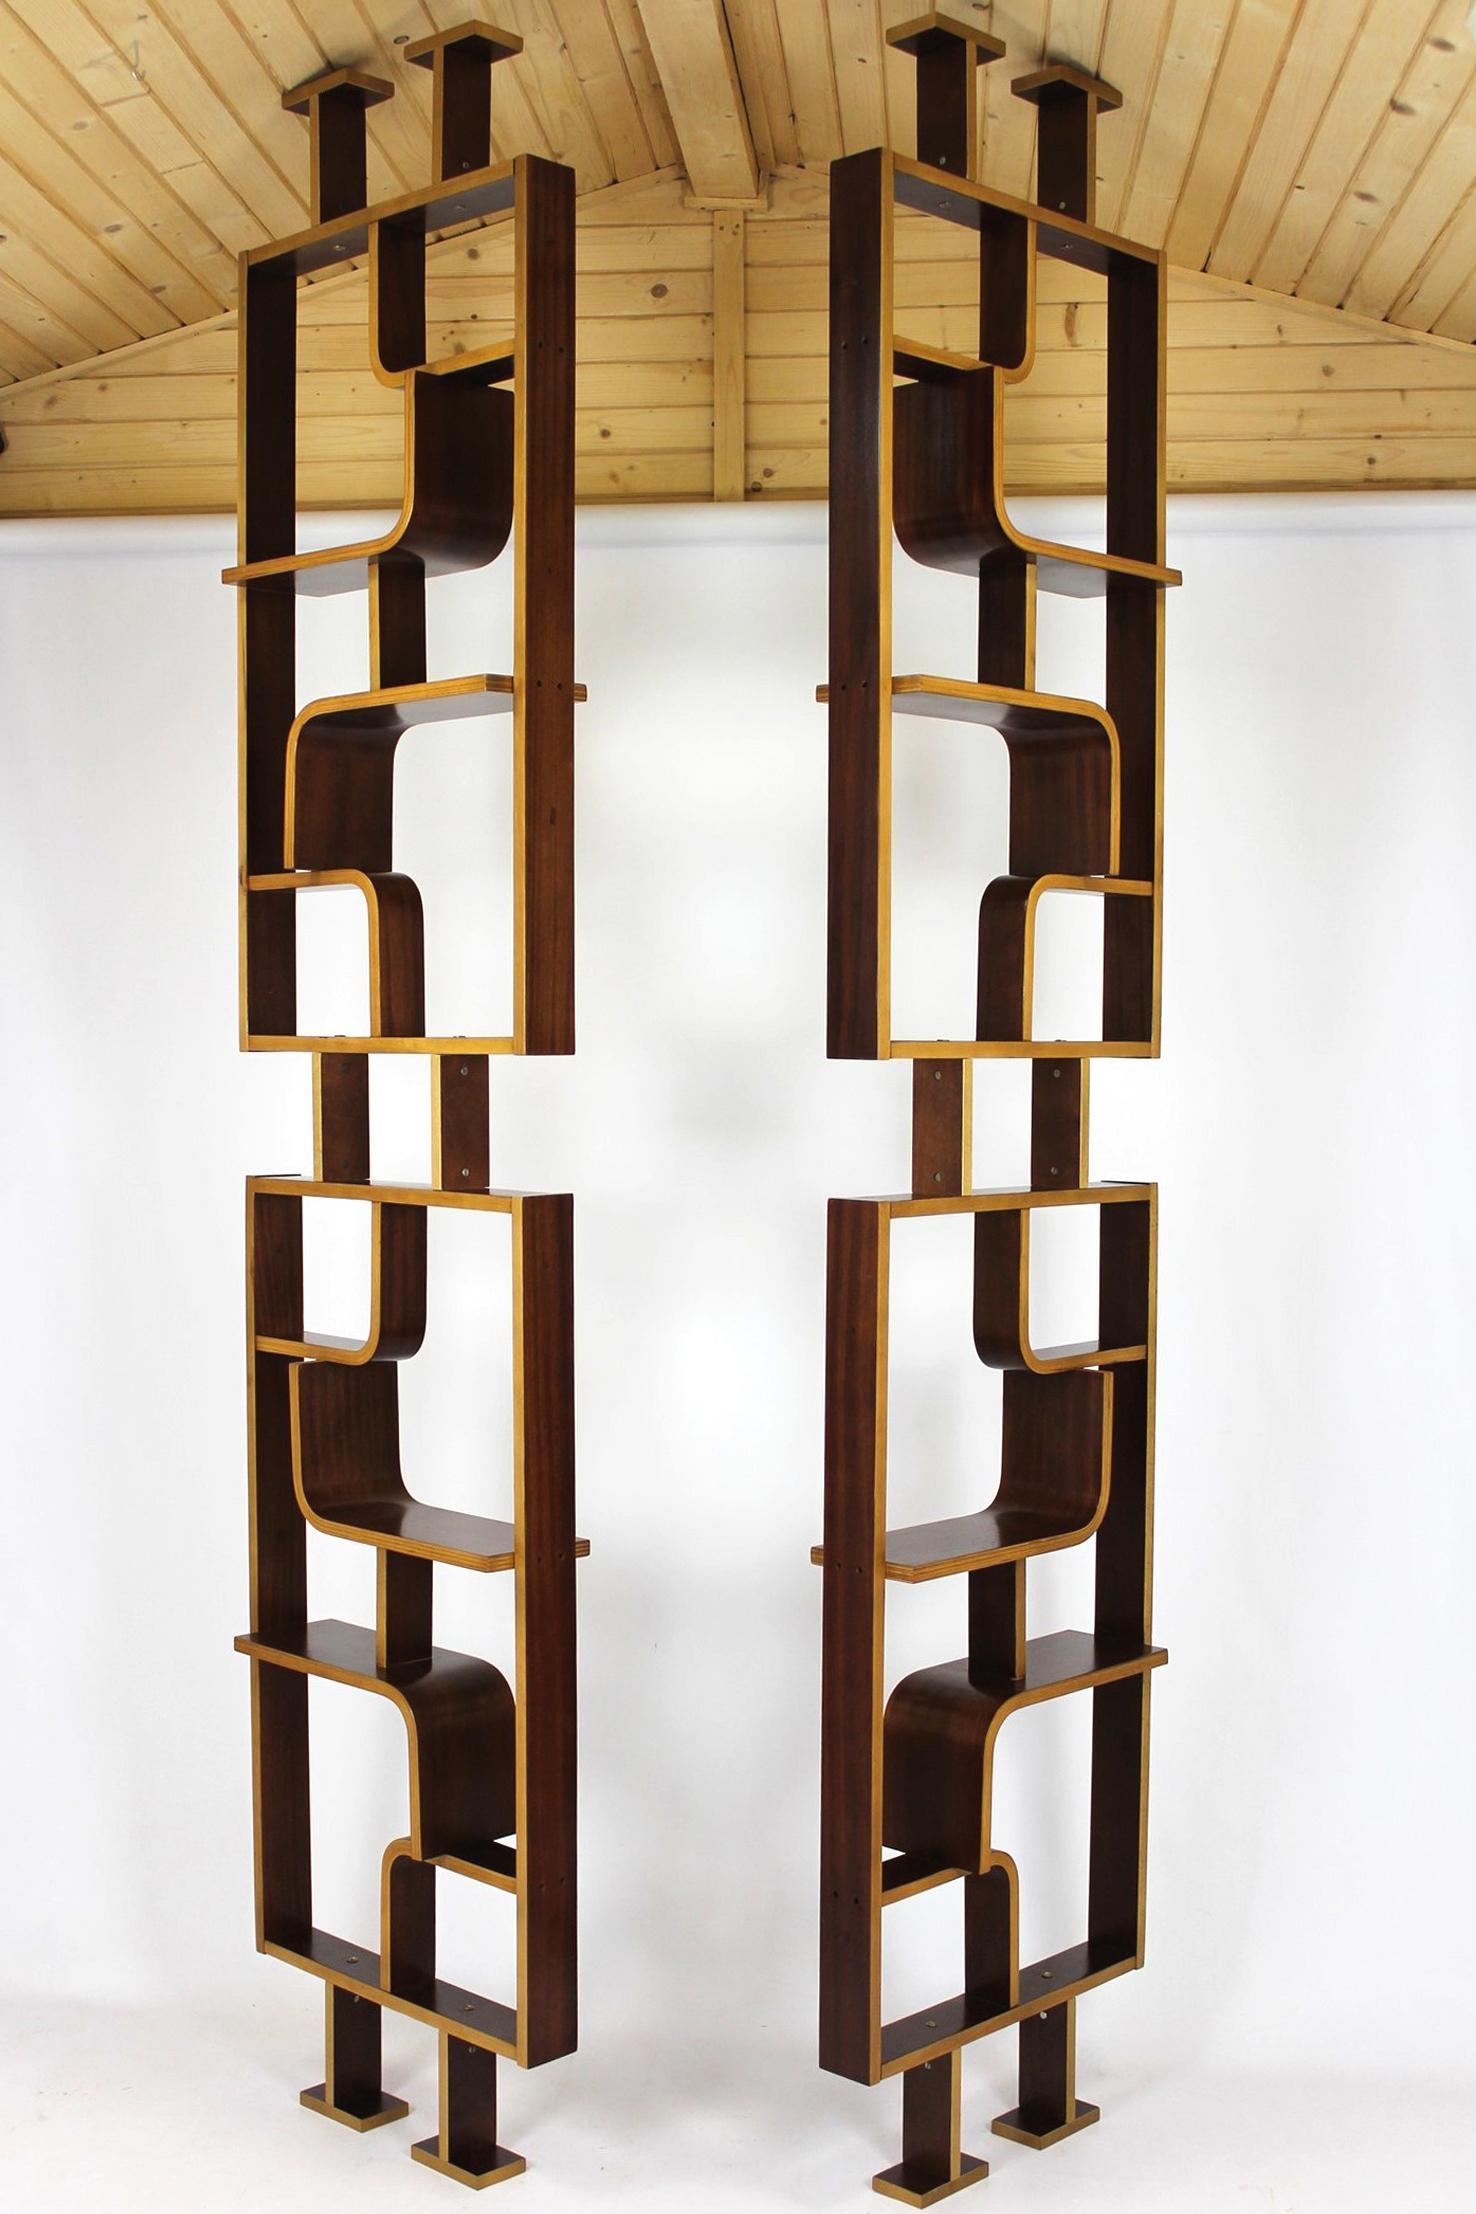 This room divider was designed by Ludvik Volák for Dřevopodnik Holešov in the 1960s.
Made of bent, veneered plywood. These room dividers have been completely restored, varnished in a satin finish.
On request, we can make new legs to a height suited